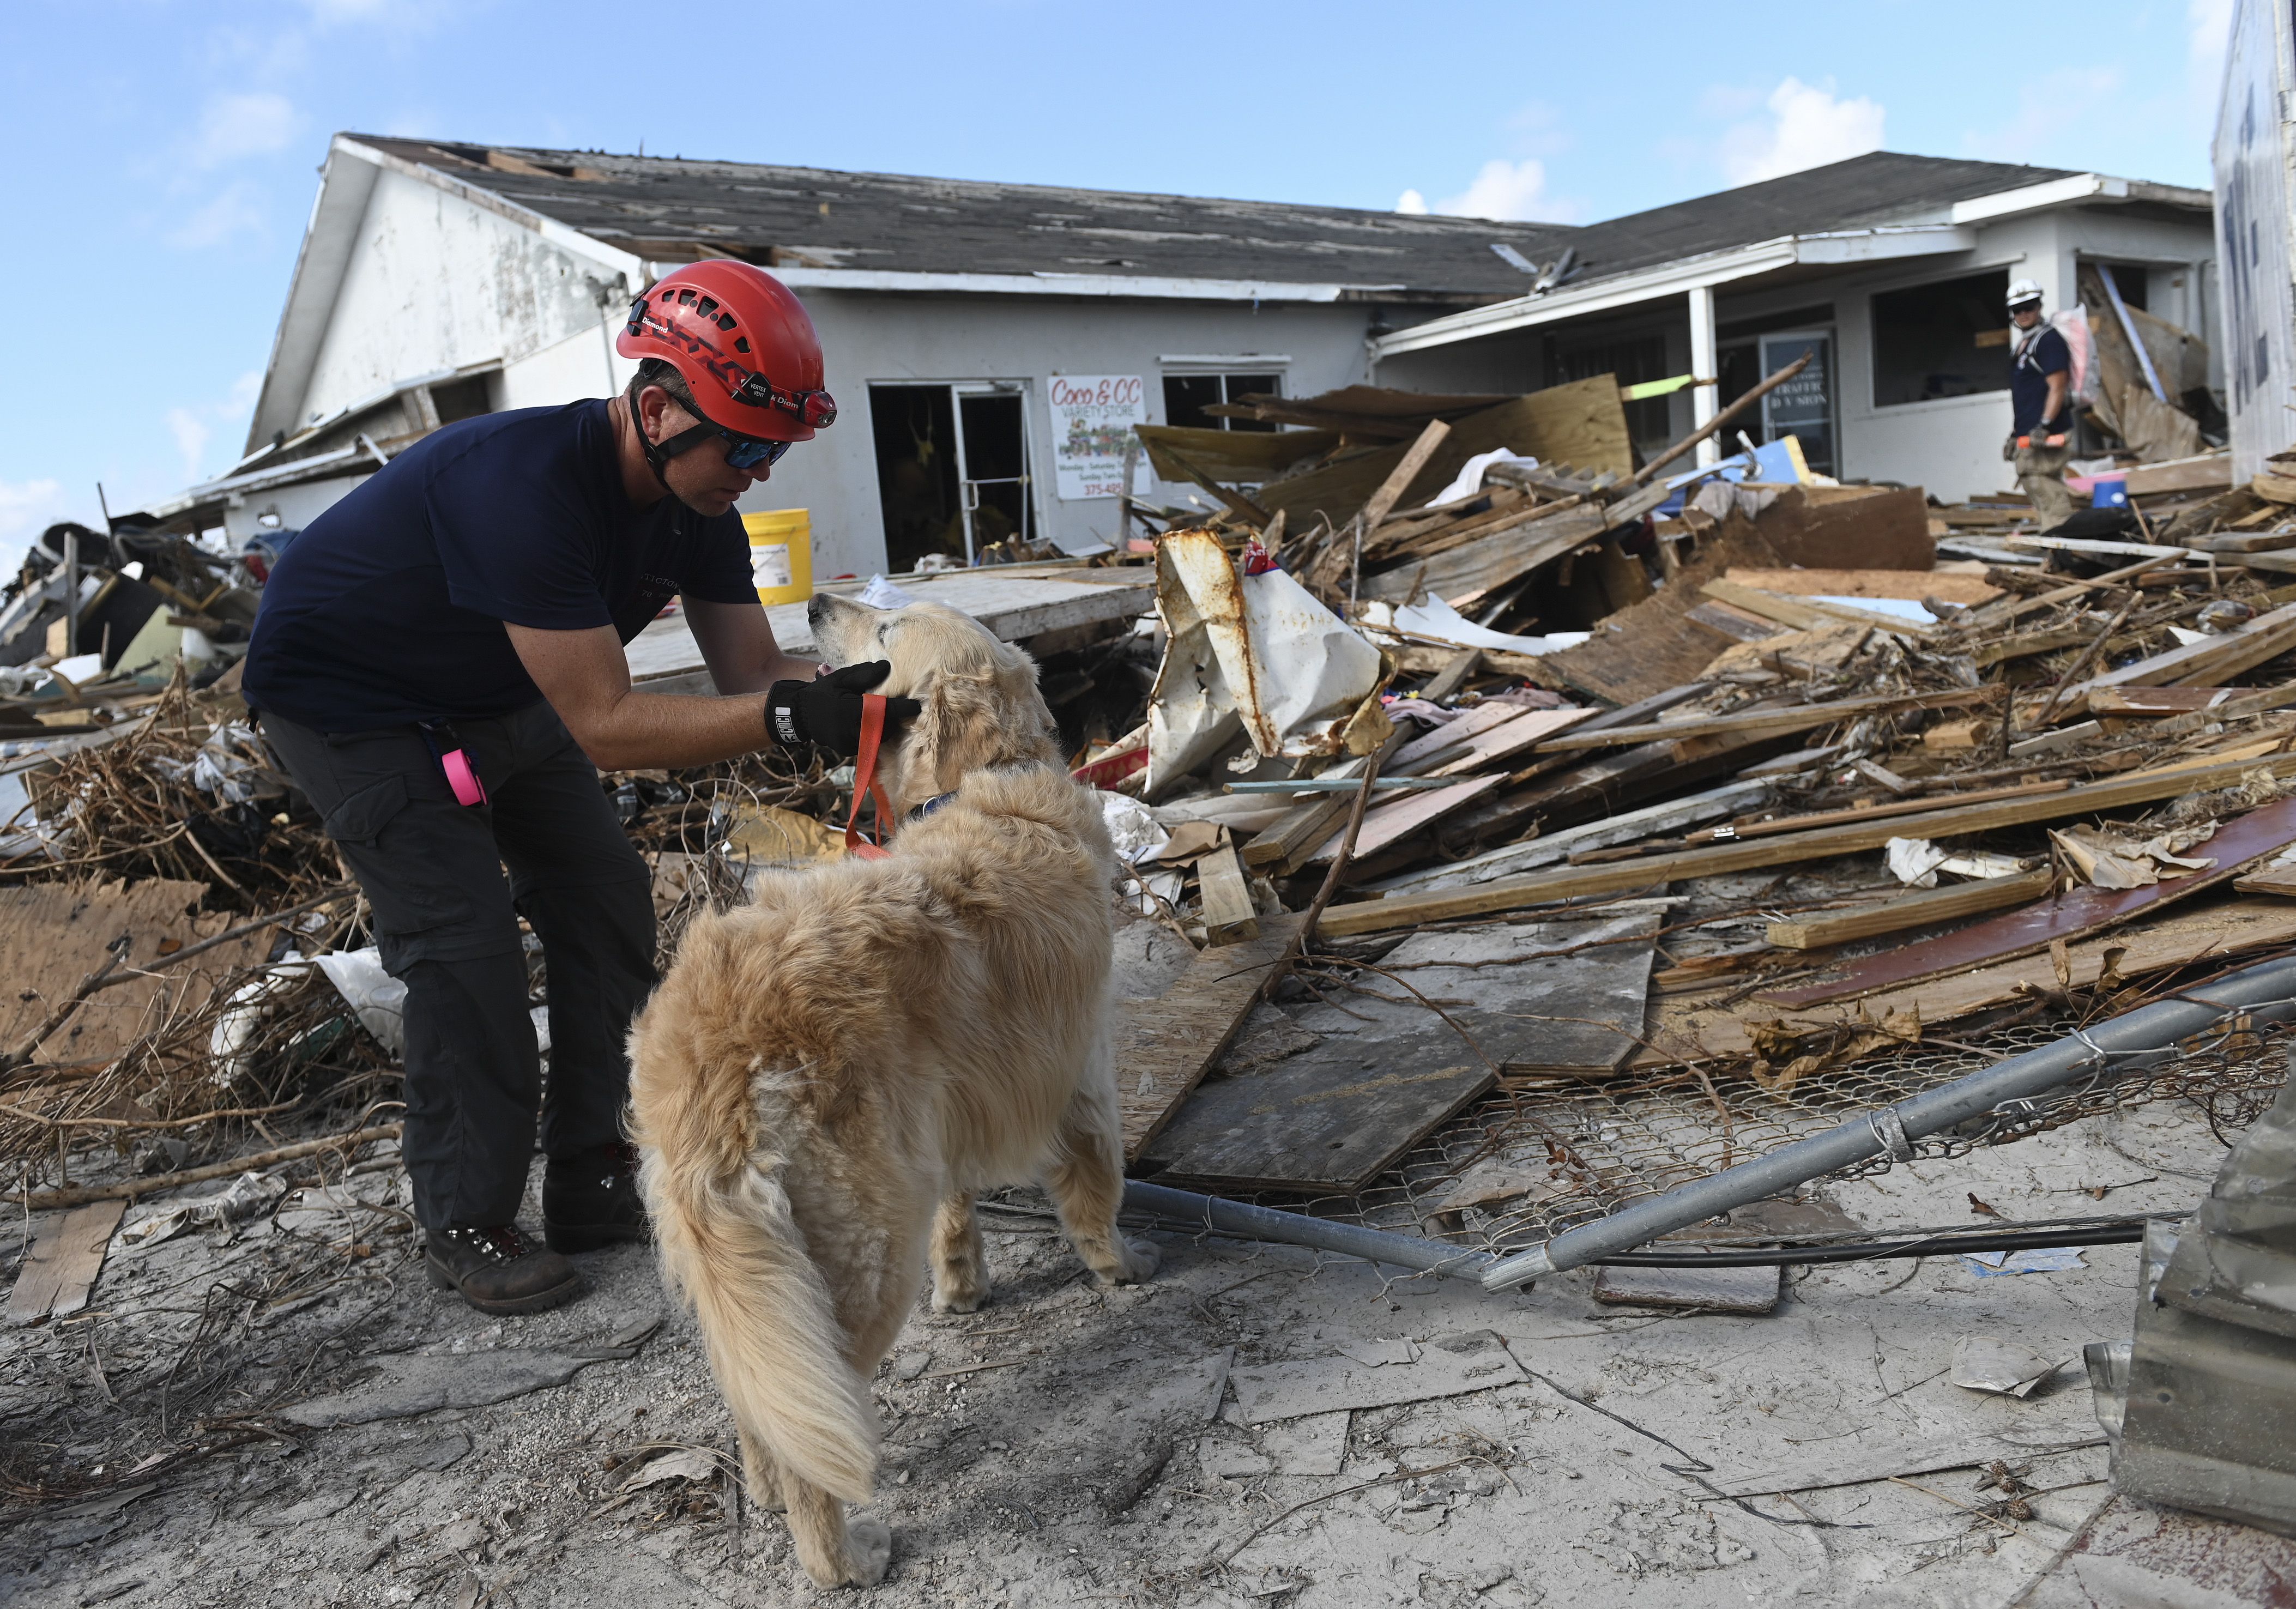  A Canadian search and rescue team search the debris in Marsh Harbour, Bahamas, on September 10